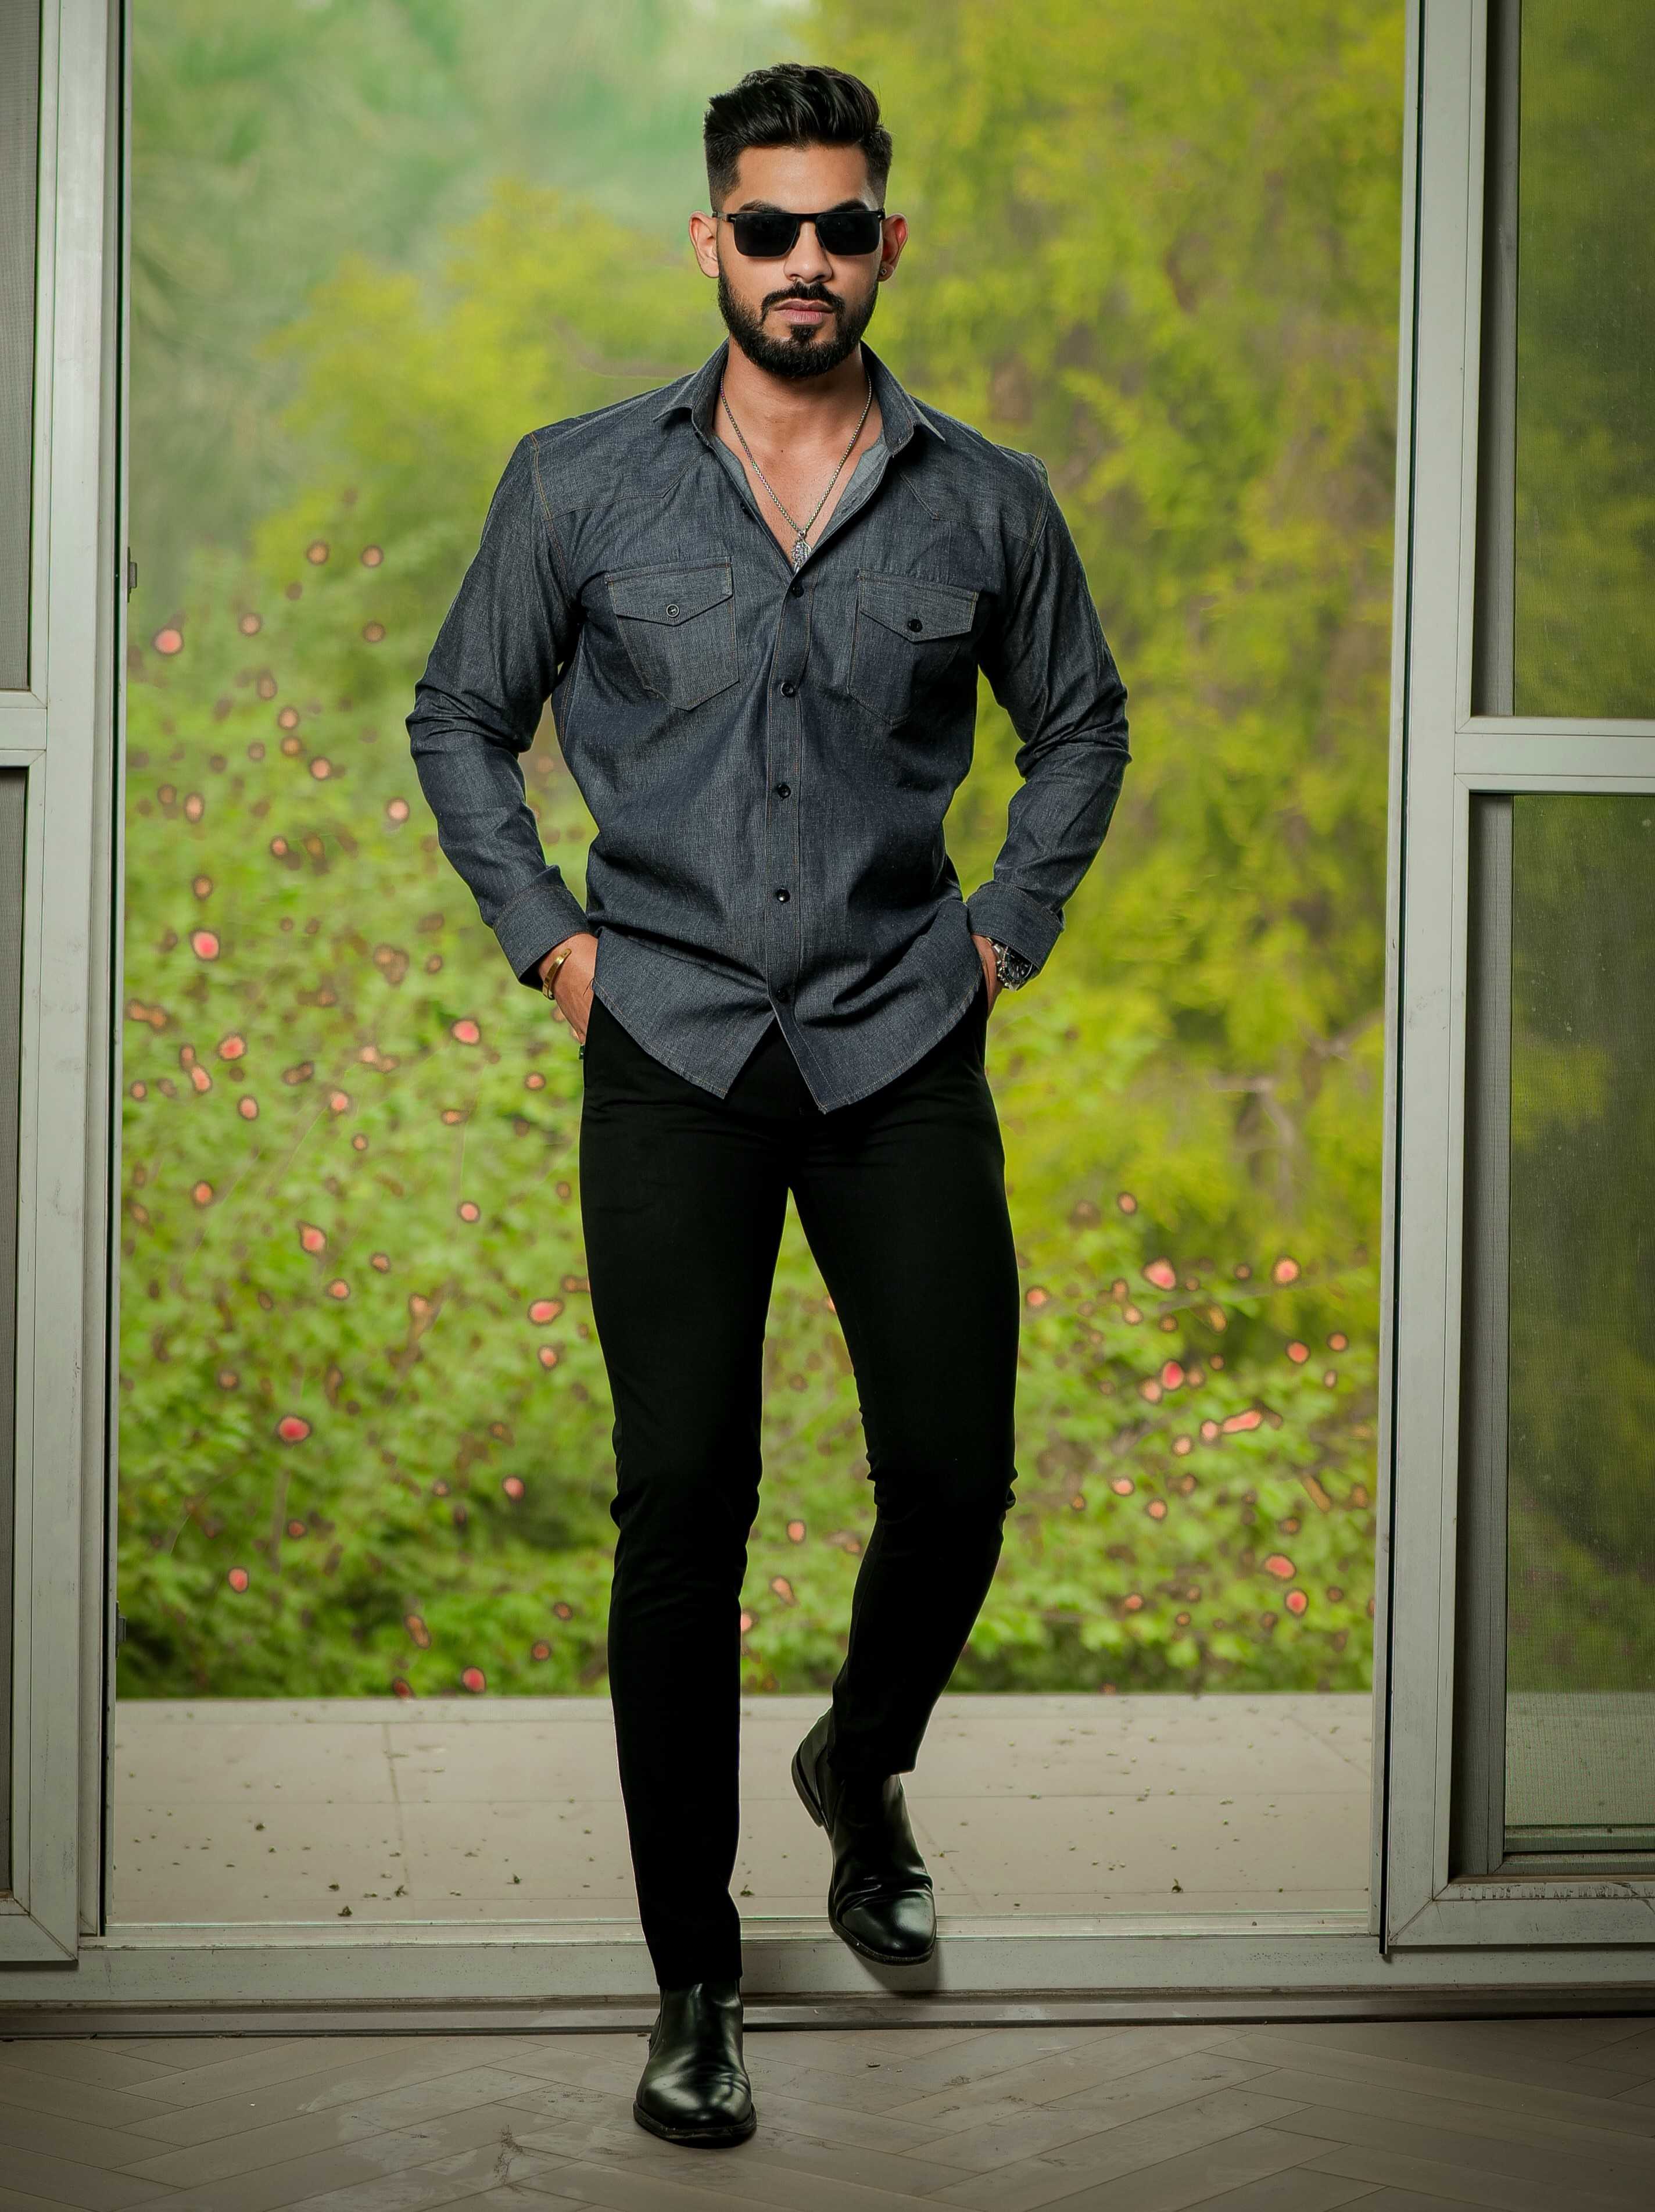 Men's Black Pant Outfits Ideas With Shirts Combination | Mens denim shirt  outfit, Denim shirt men, Men's casual style